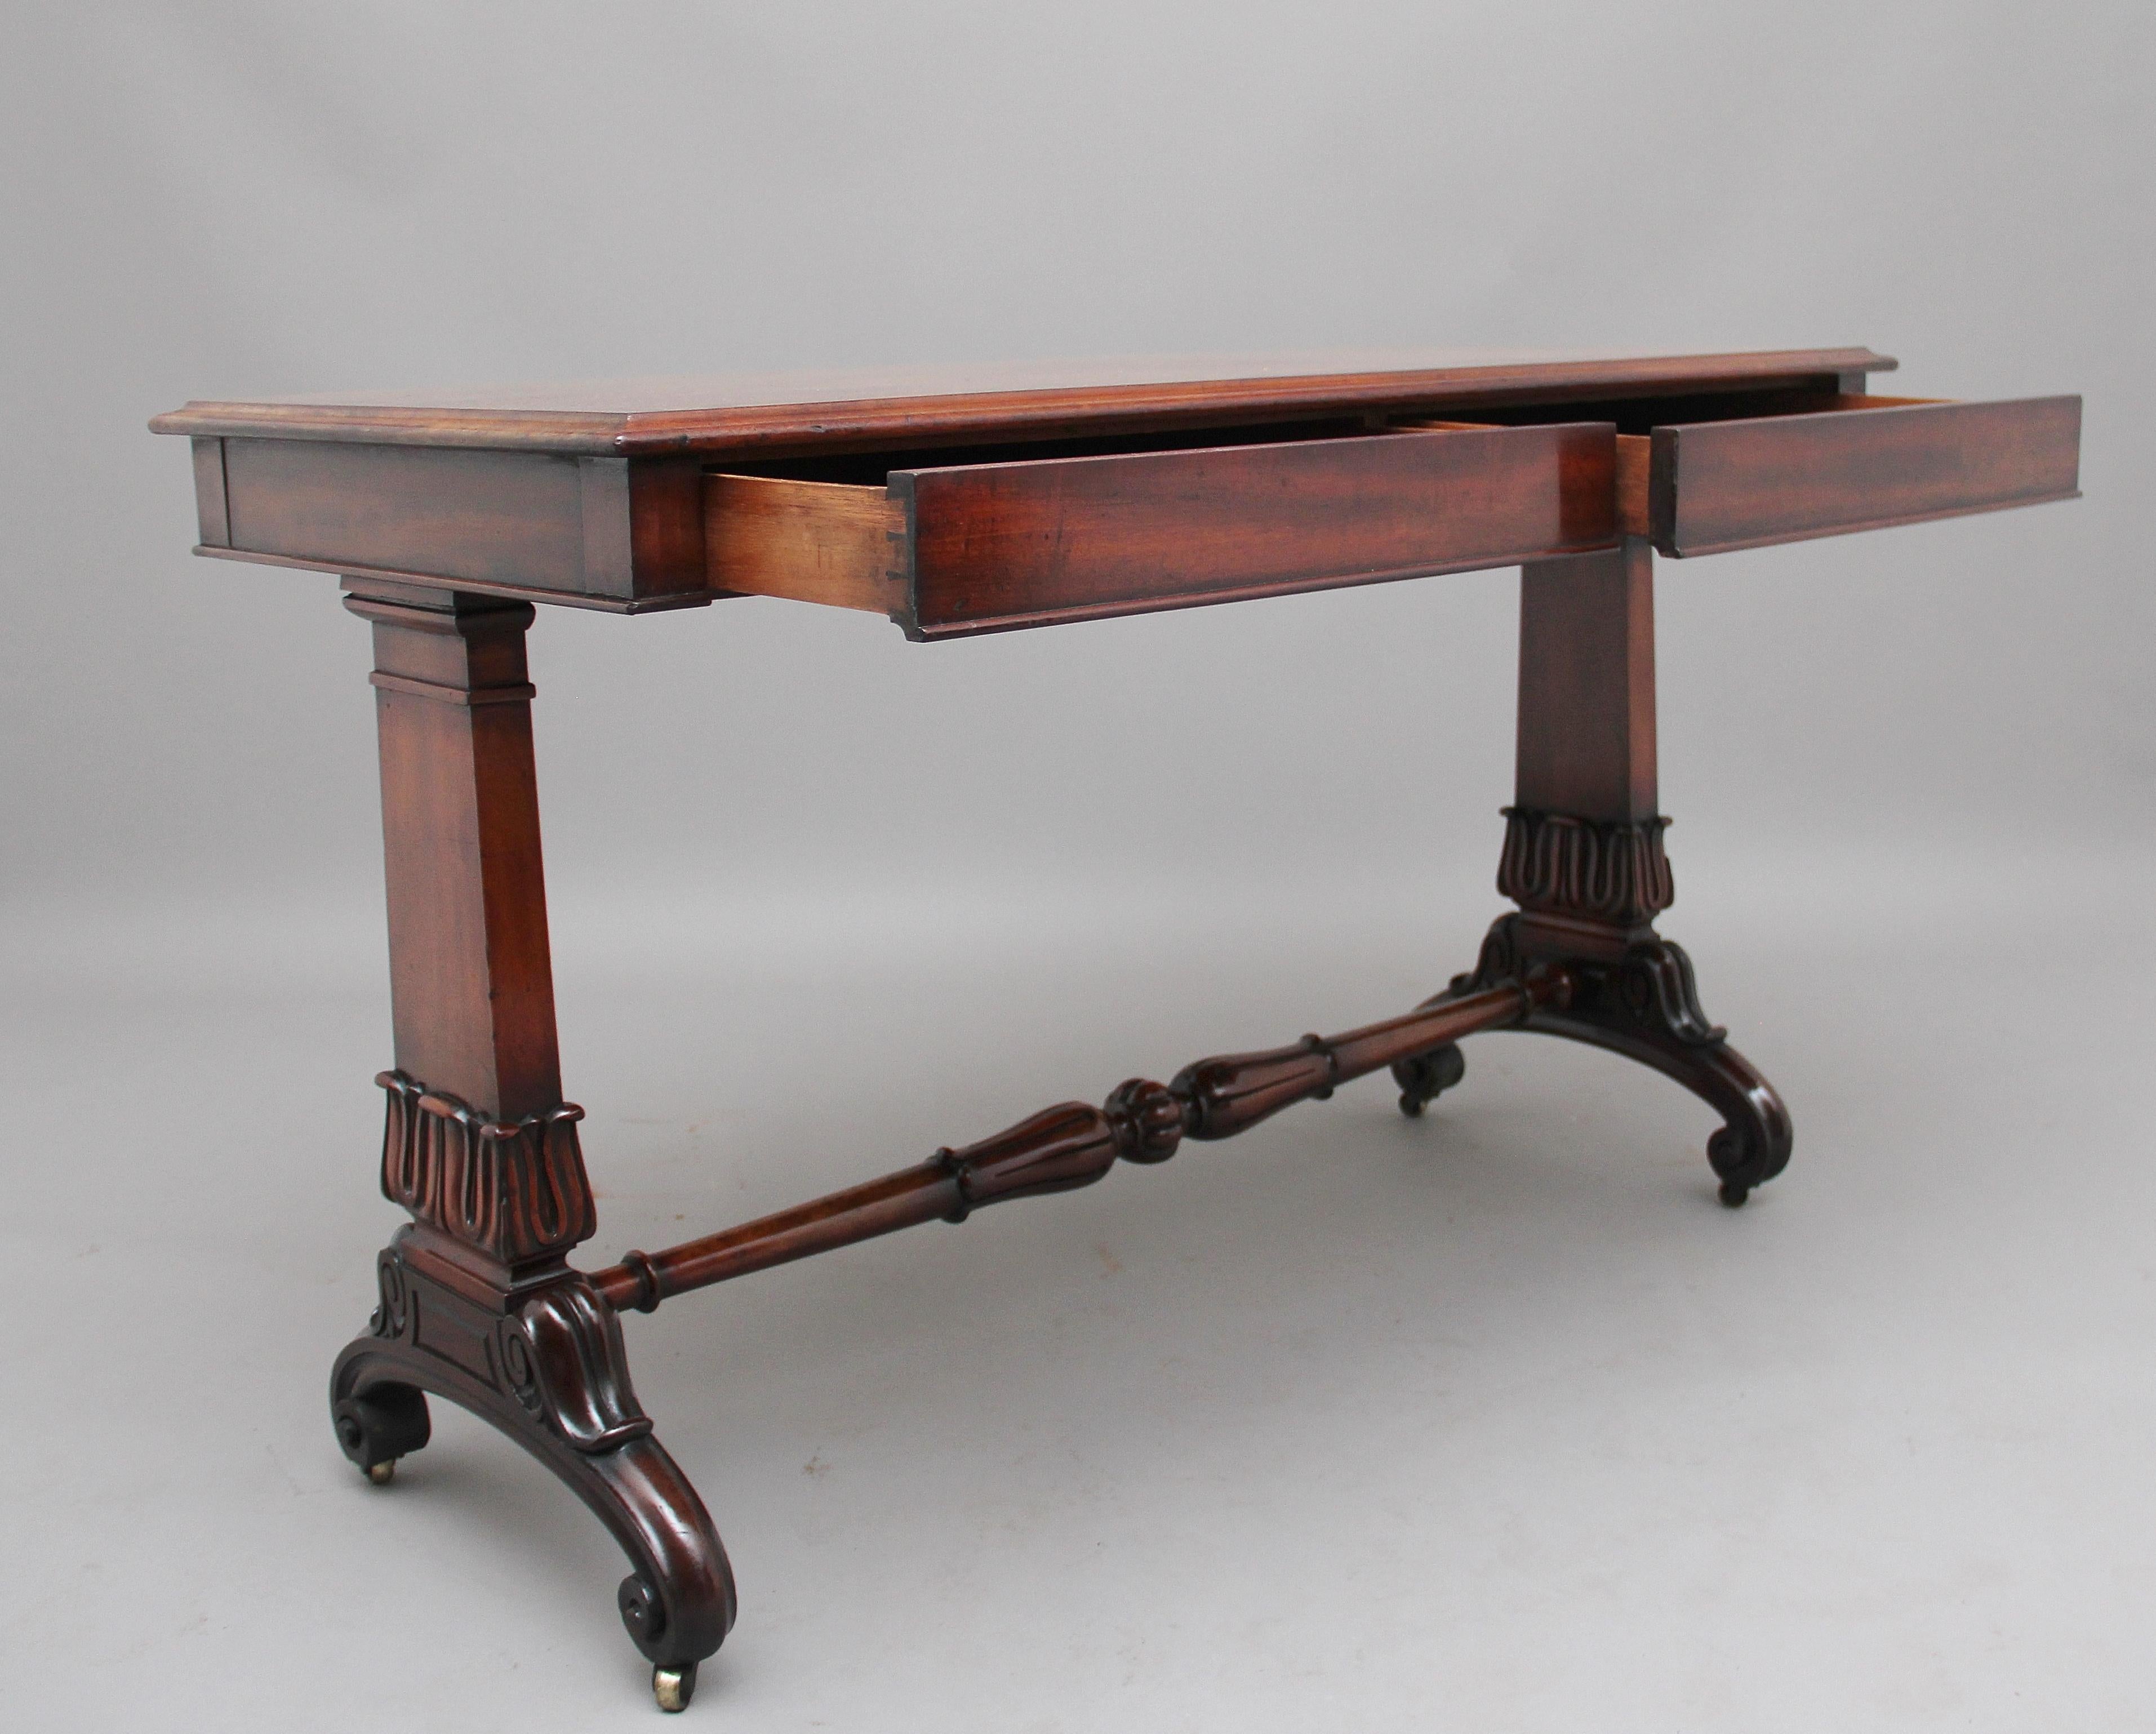 A lovely quality early 19th century mahogany library table, having a wonderfully figured solid top with a thumb moulded edge with two oak lined frieze drawers below, supported on two end supports with carved tulip decoration united with a turned and